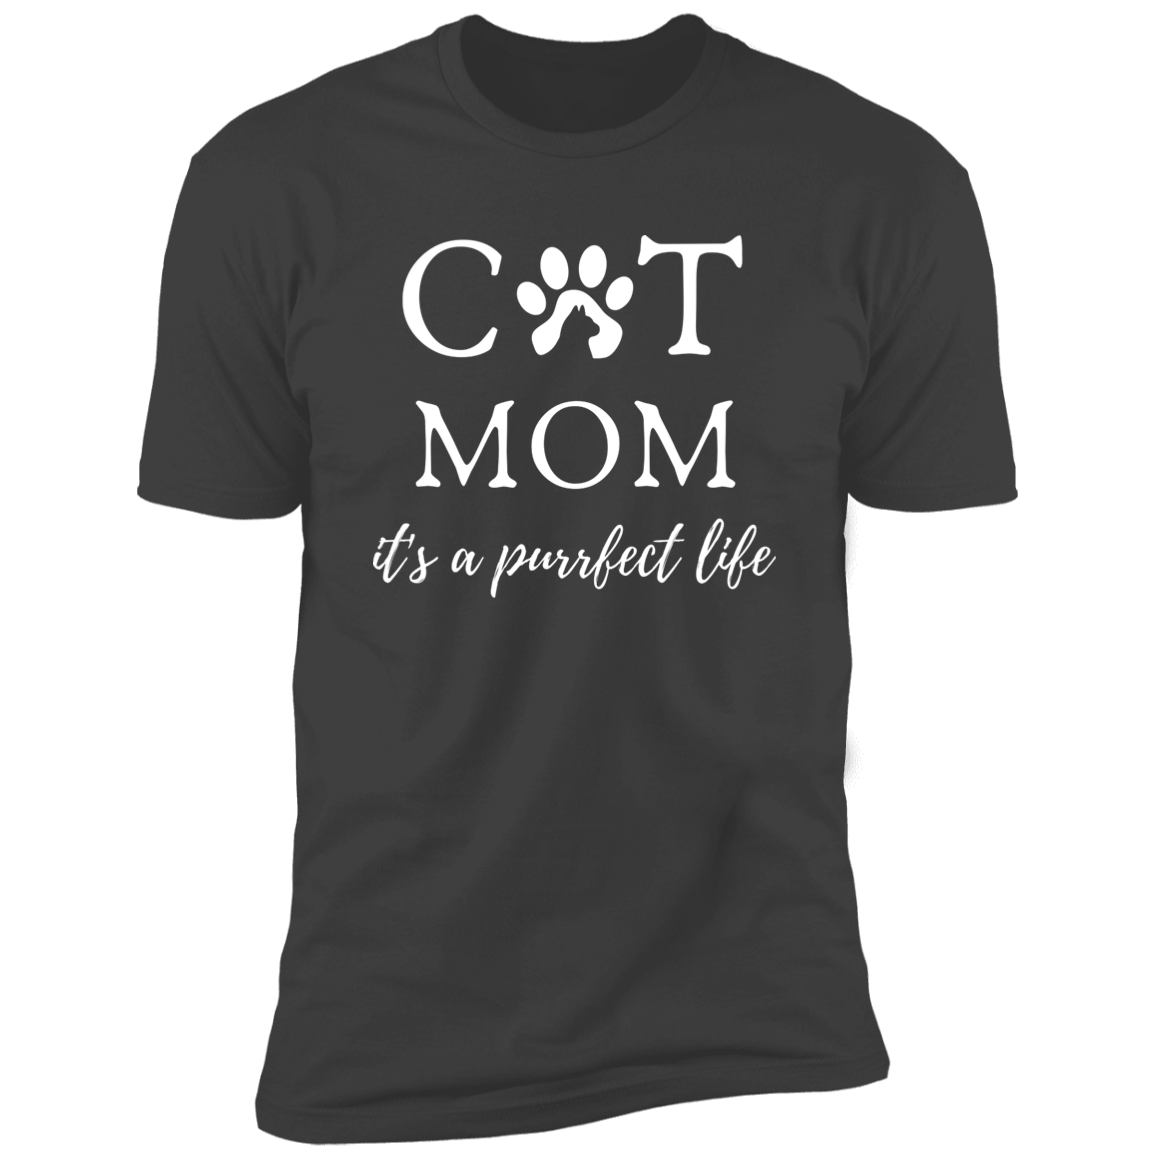 Cat Mom It's a Purrfect Life T-shirt, Cat Mom Shirt for humans, in heavy metal gray